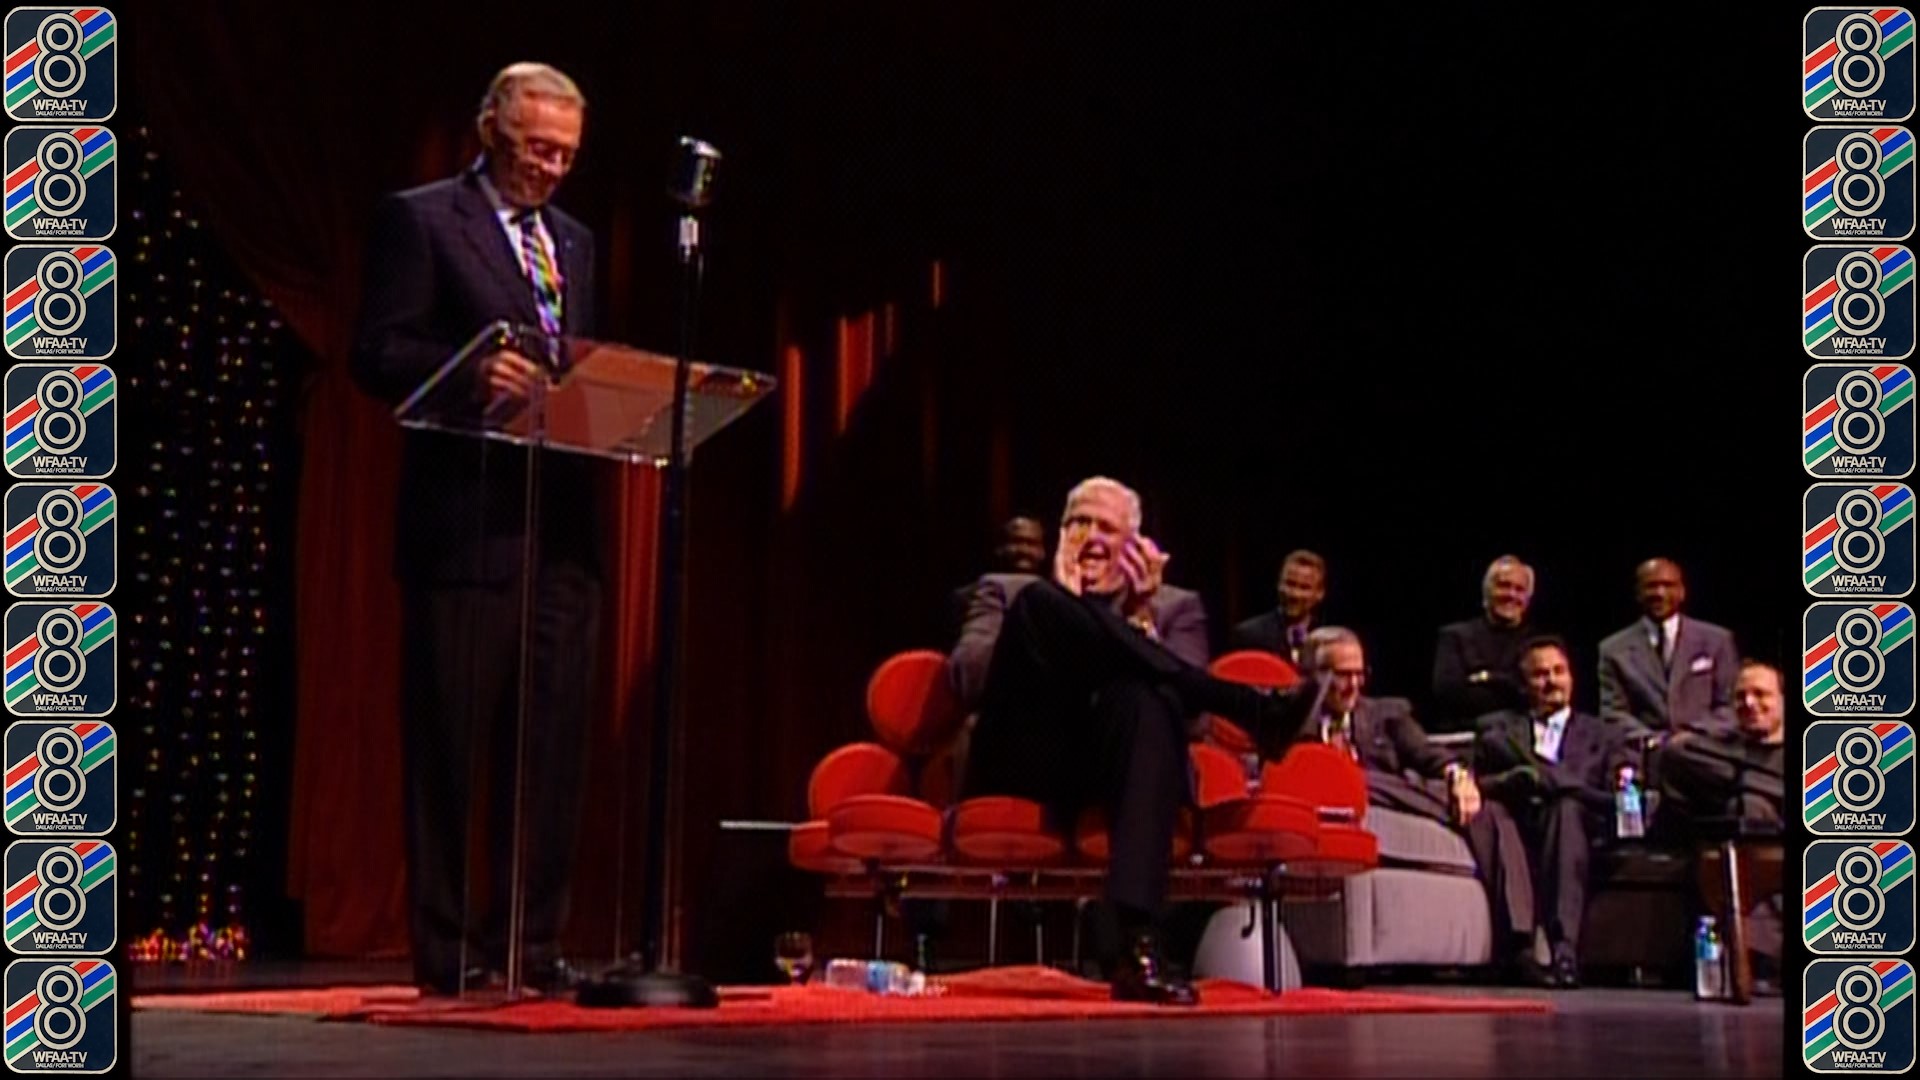 In 2003, WFAA held a roast of sportscaster Dale Hansen with some North Texas sports legends in attendance and at the microphone.